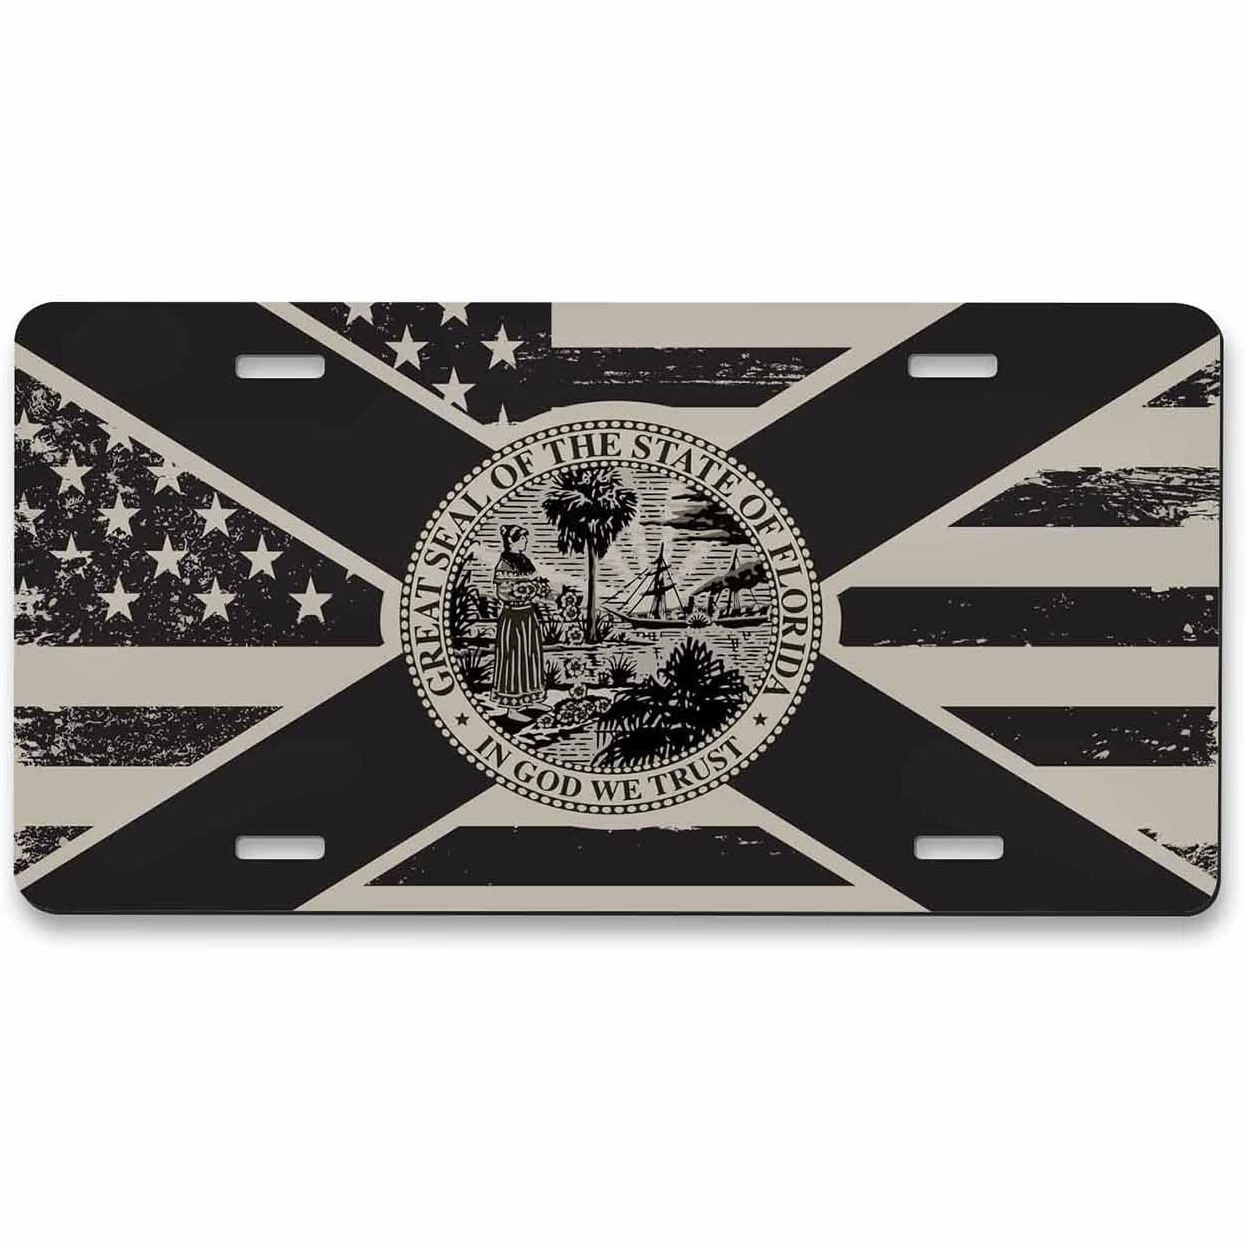 Show Your Florida Pride With This Custom Sunshine State License